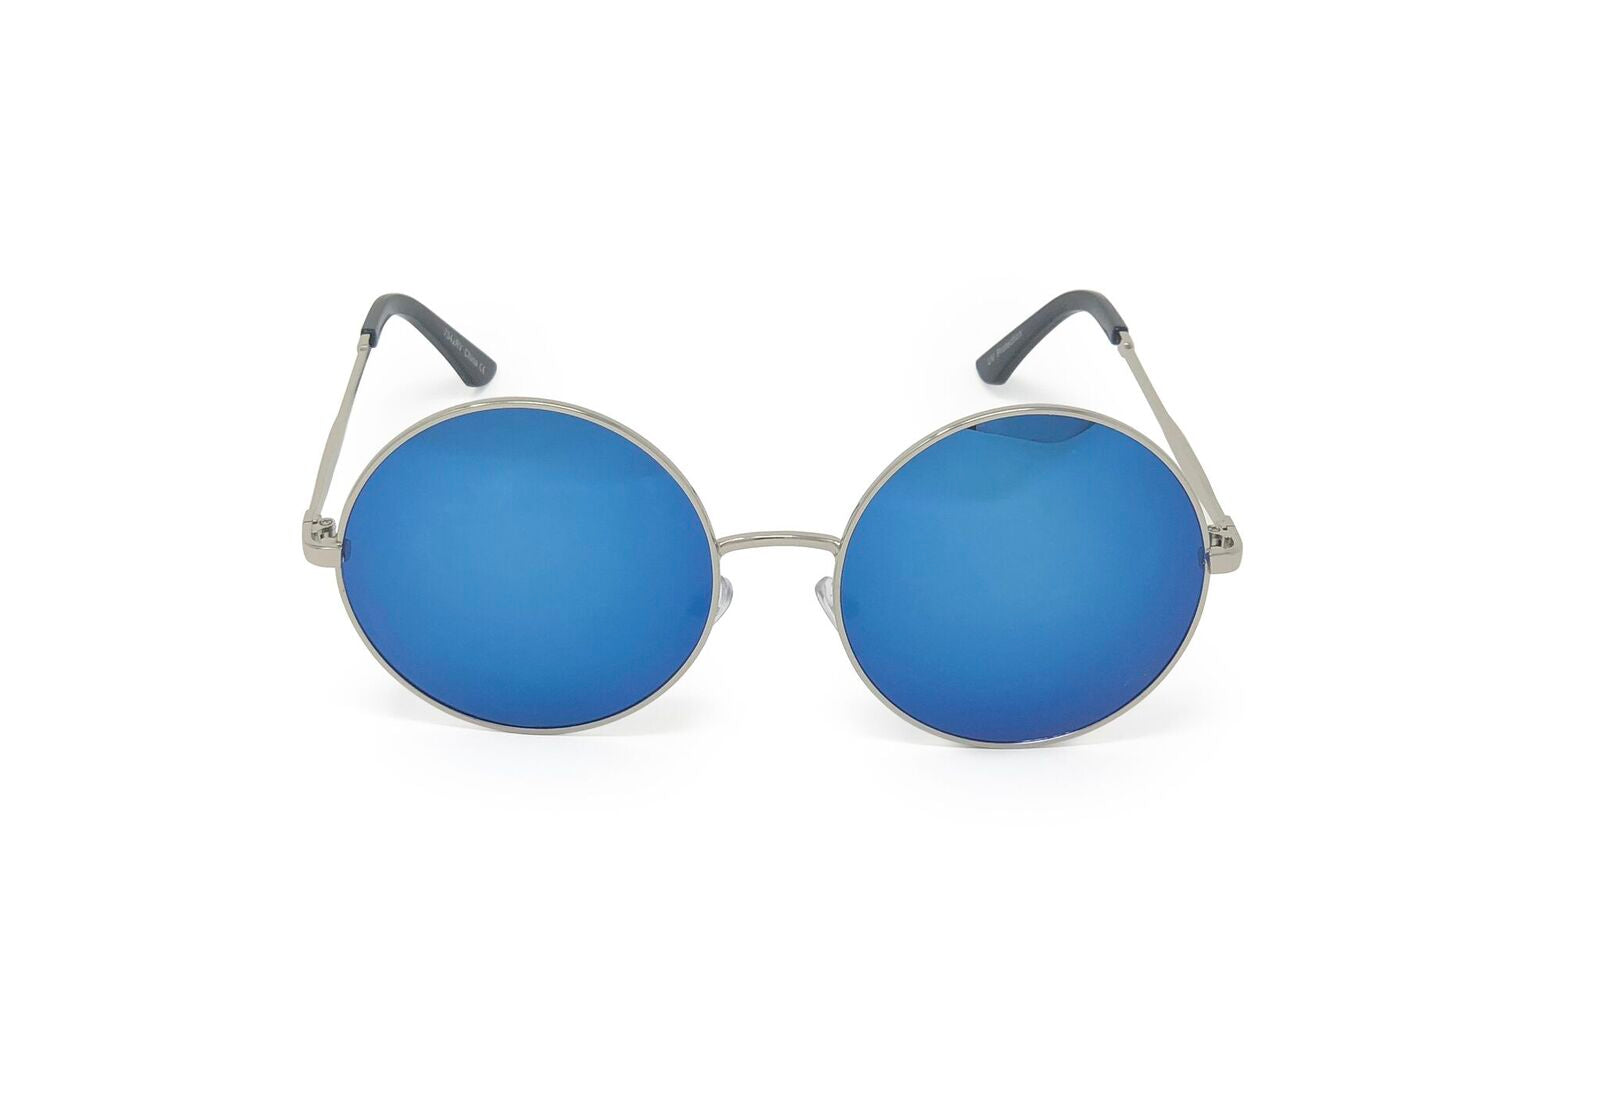 Round Large Circular Colored Mirrored Sunglasses